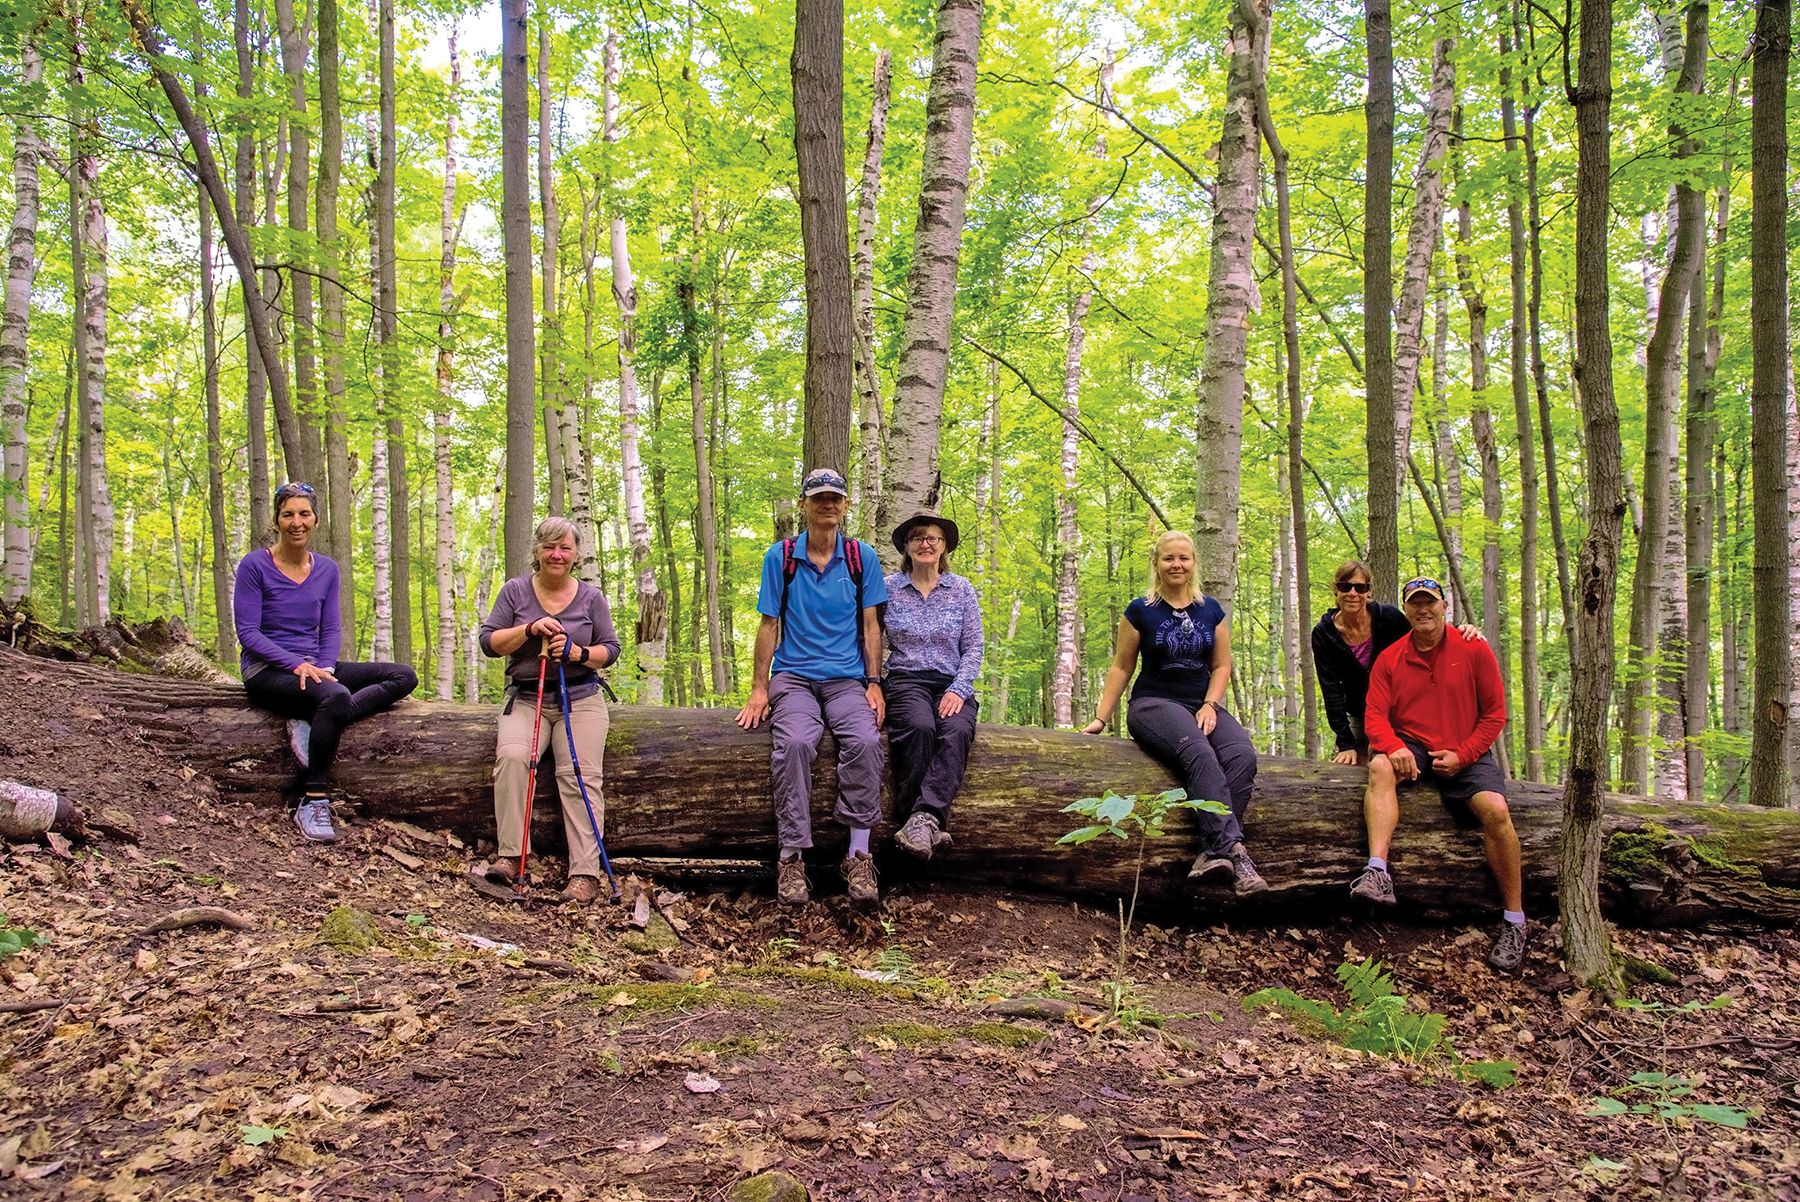 Emerging from the confines of the Singhampton Caves, the hikers stop to take in an expansive view of a large grove of birch trees. Left to right: Deb Bloom Hall, writer Laurie Stephens, Barry Zimmermann, Karen Hall, Katia Abaimova, Morag and Dave Nieuwold.